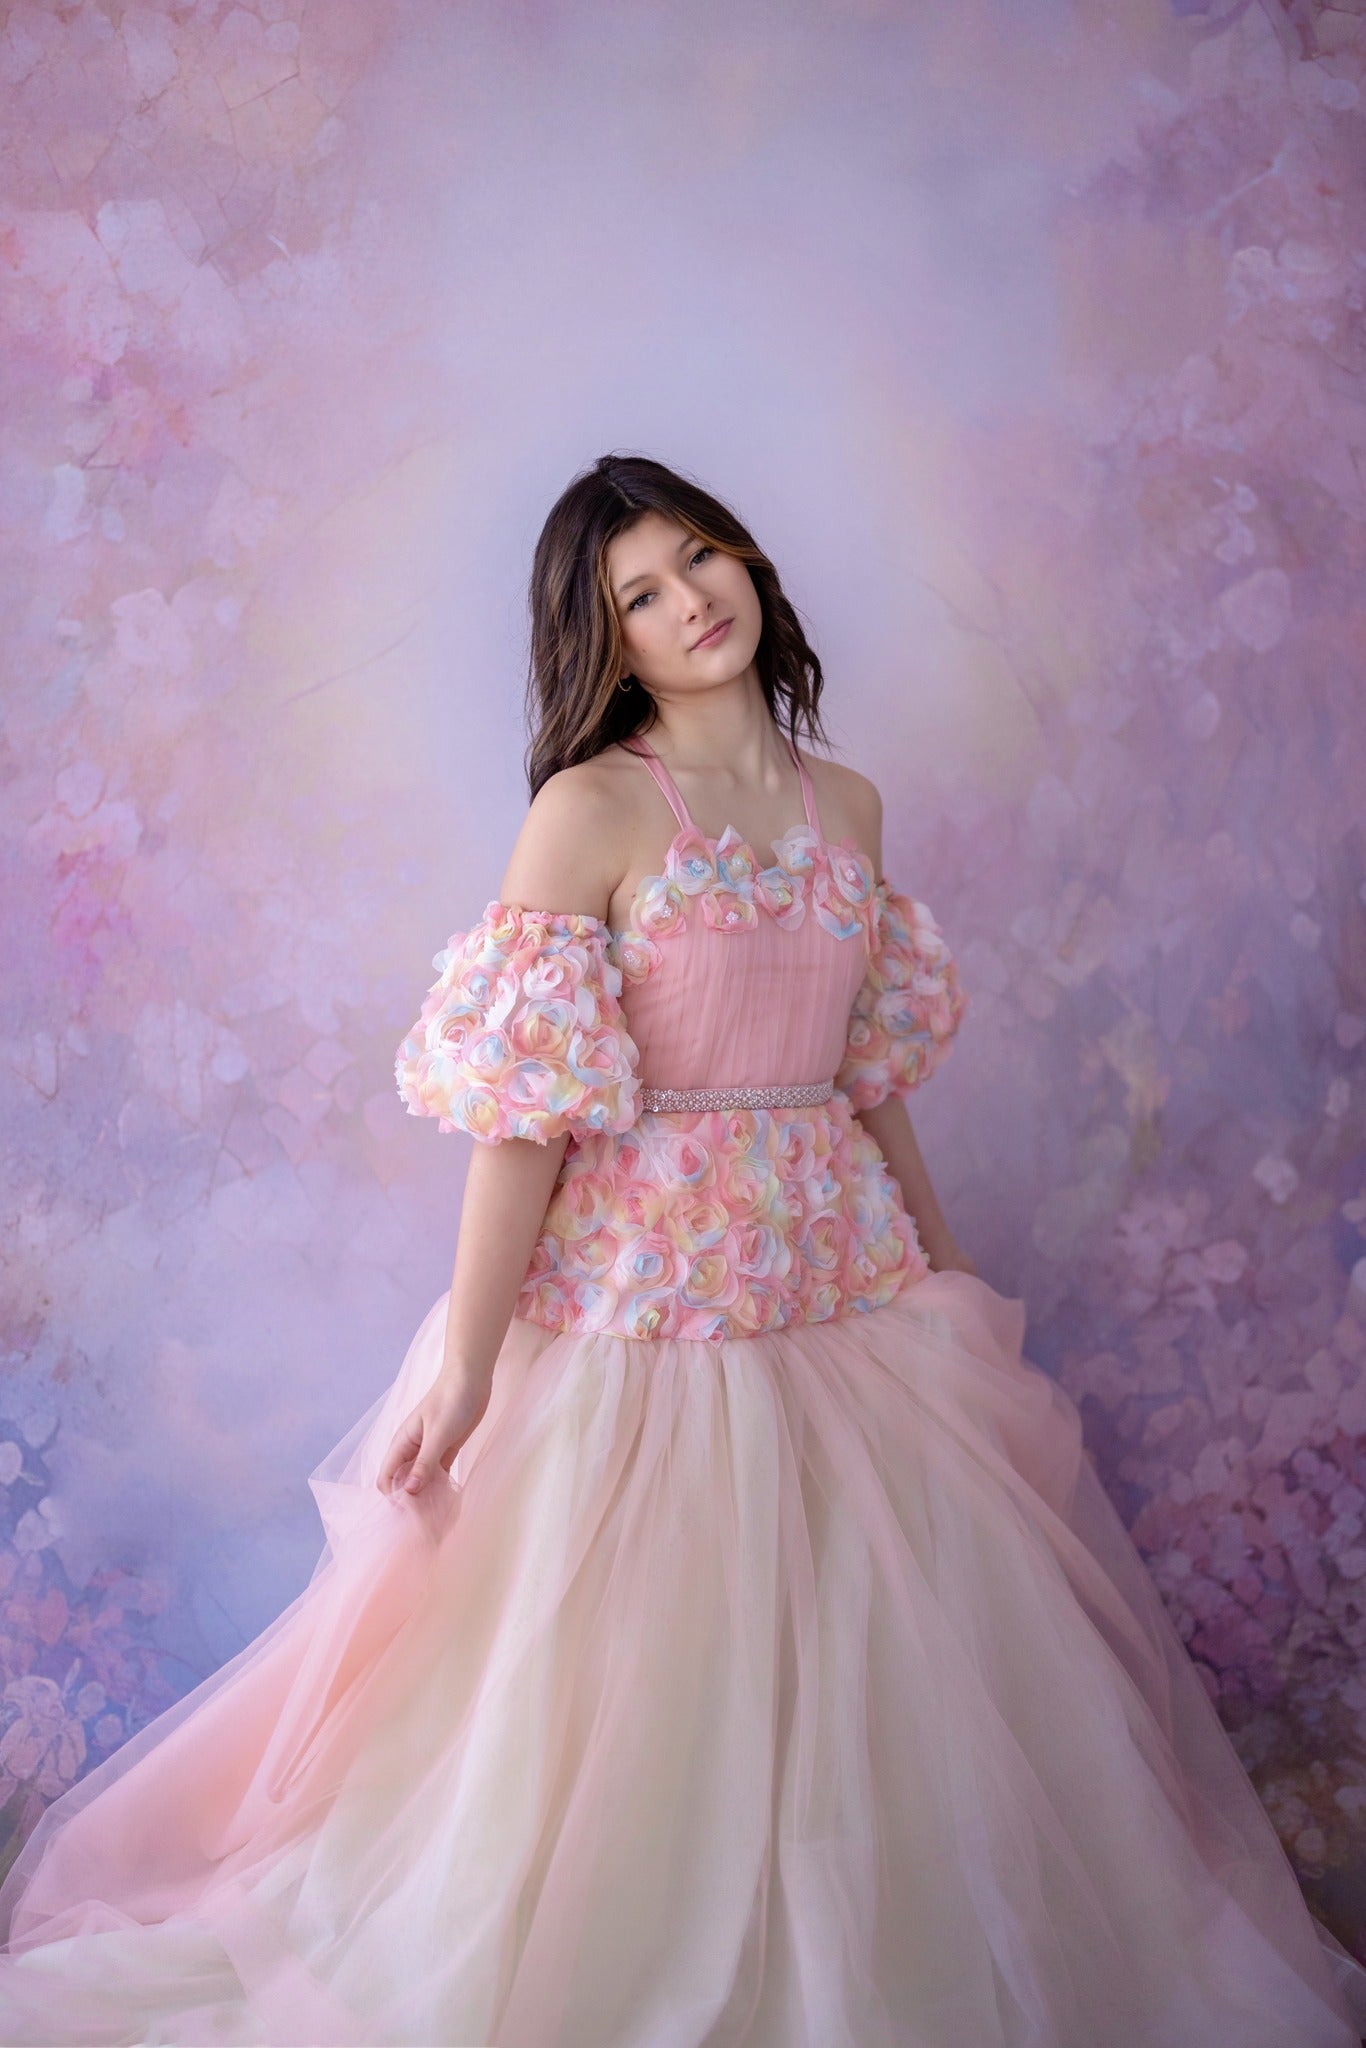 Flower themed gowns for photography sessions